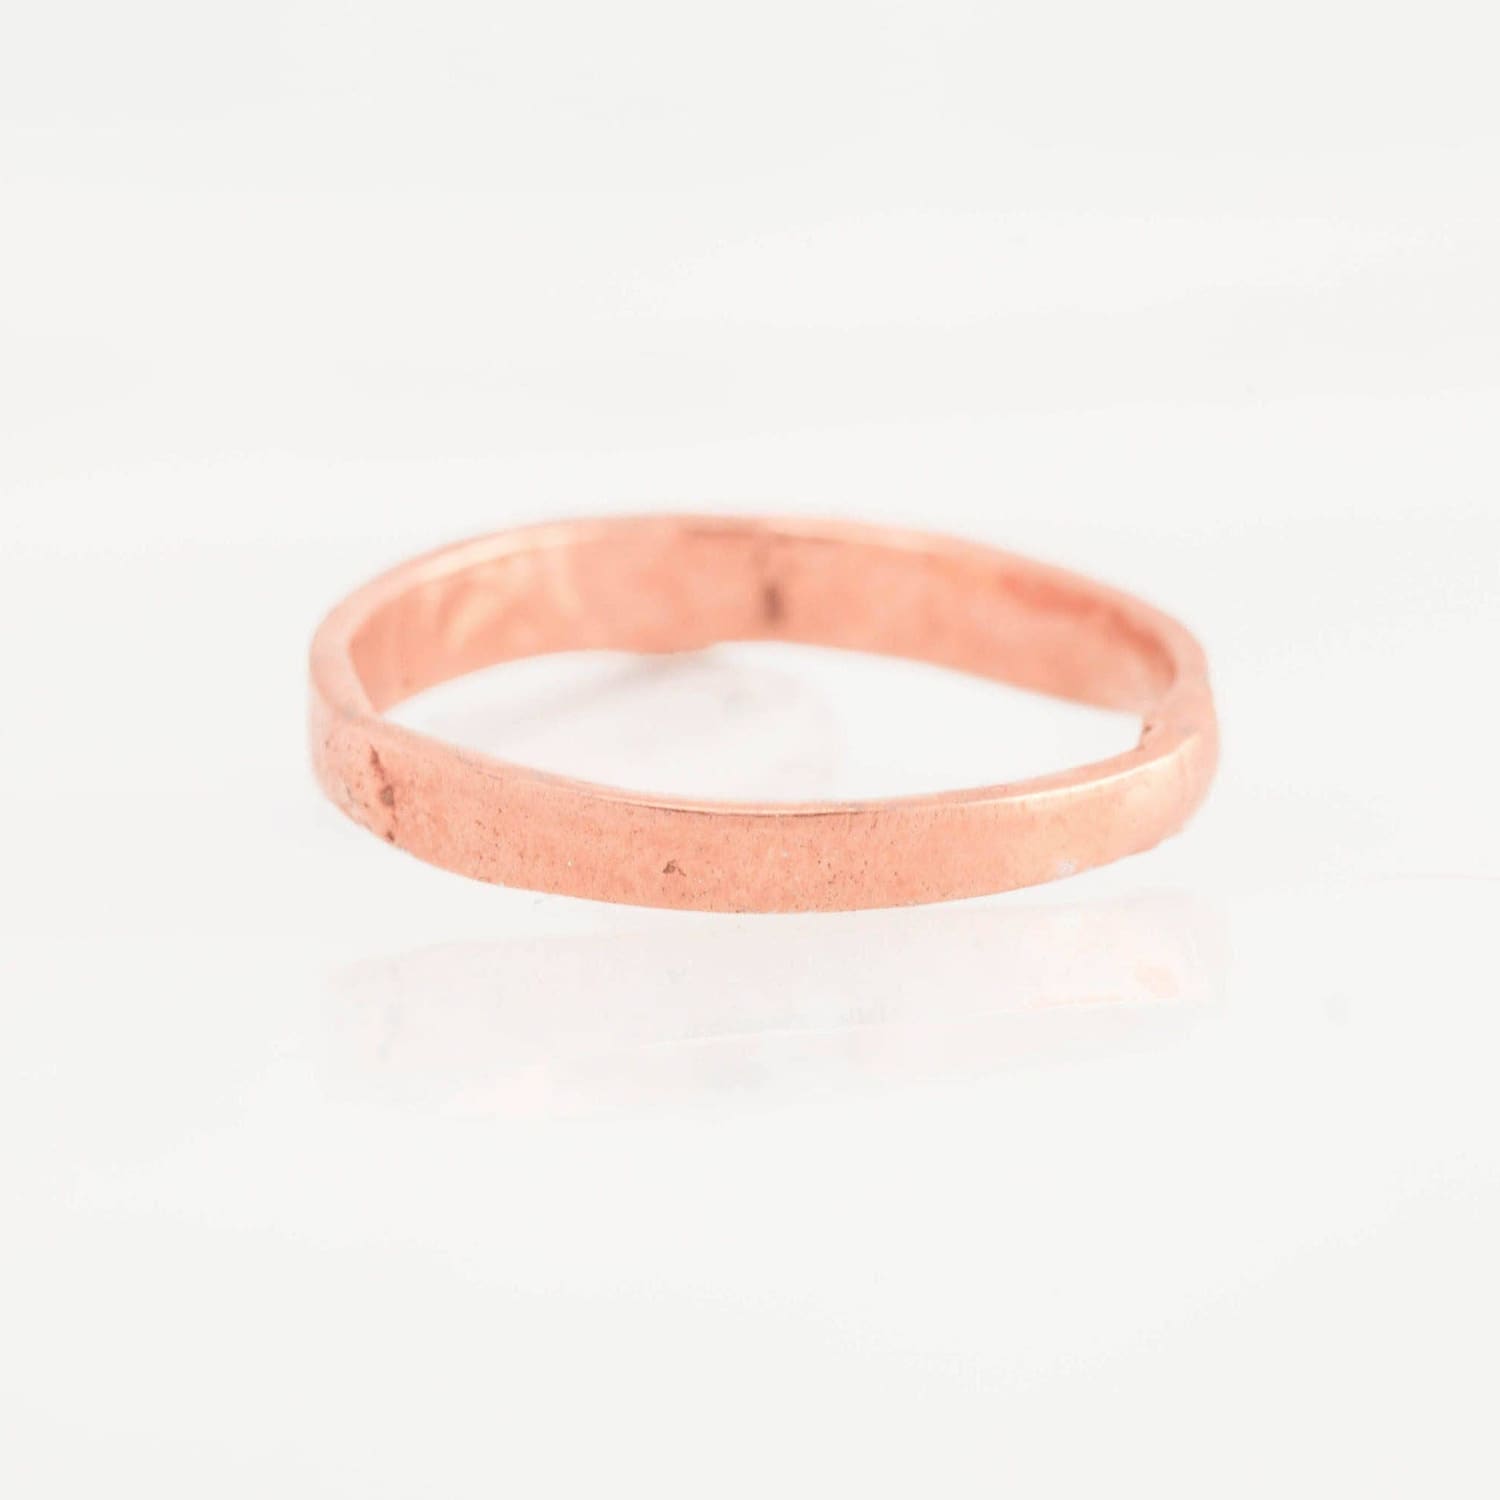 3mm Rose Gold Textured Band Raw Gemstone Jewelry Rough